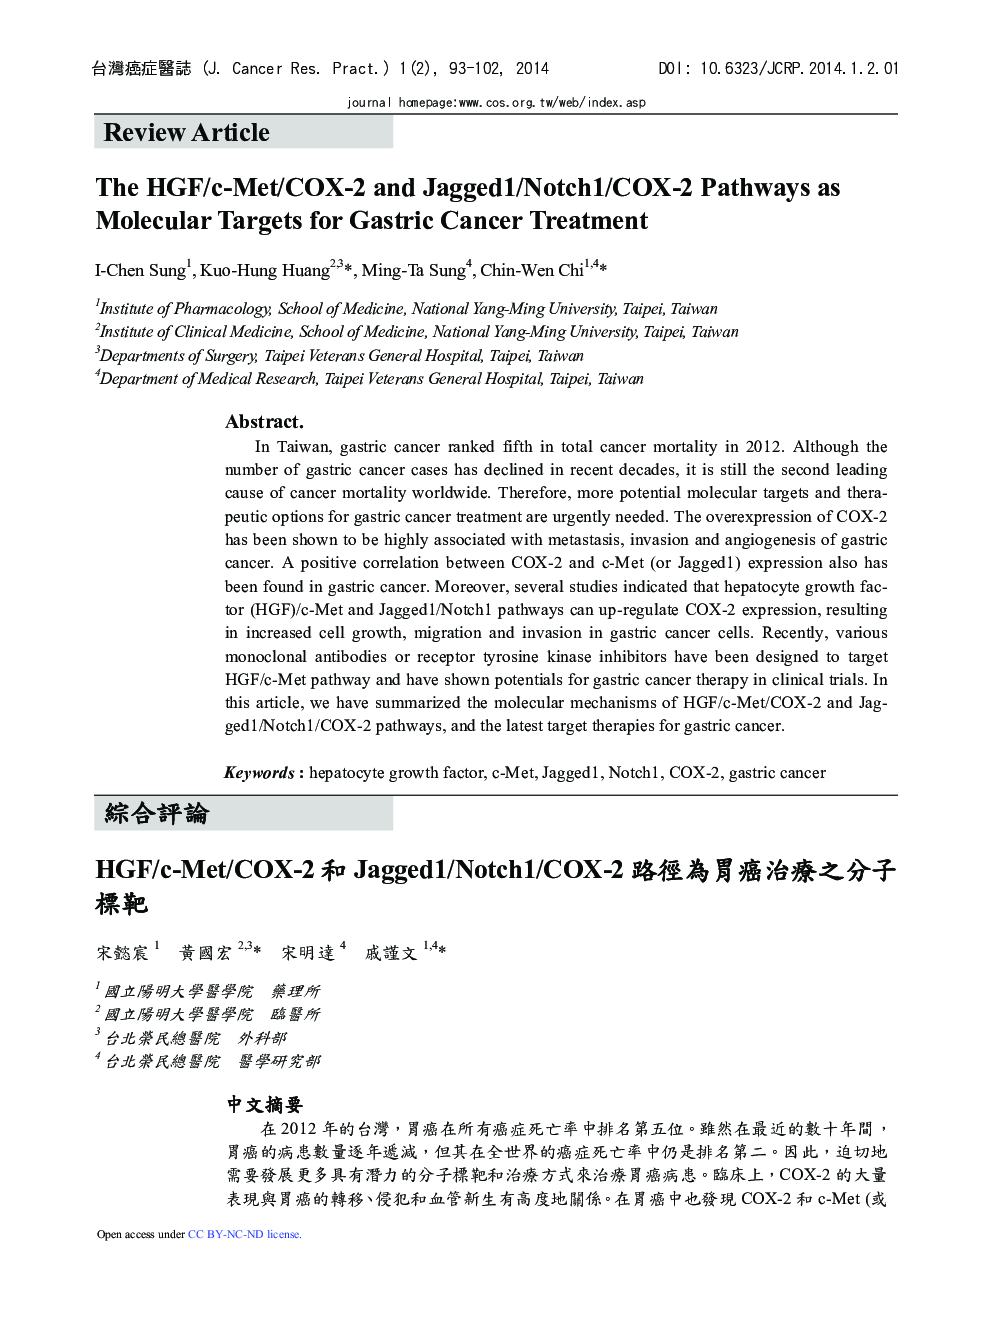 The HGF/c-Met/COX-2 and Jagged1/Notch1/COX-2 Pathways as Molecular Targets for Gastric Cancer Treatment